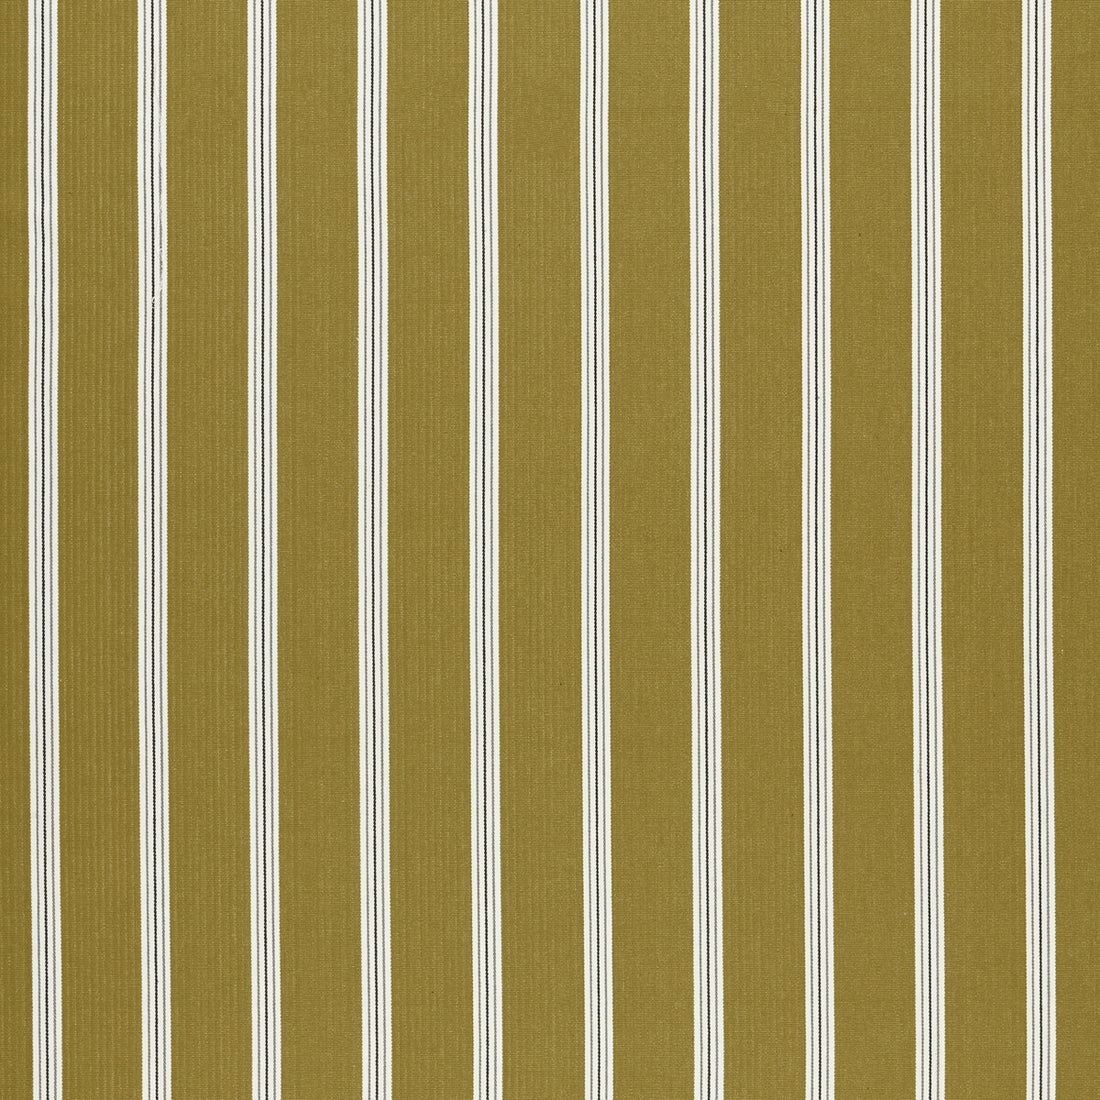 Knightsbridge fabric in ochre/charcoal color - pattern F1500/04.CAC.0 - by Clarke And Clarke in the Clarke &amp; Clarke Edgeworth collection